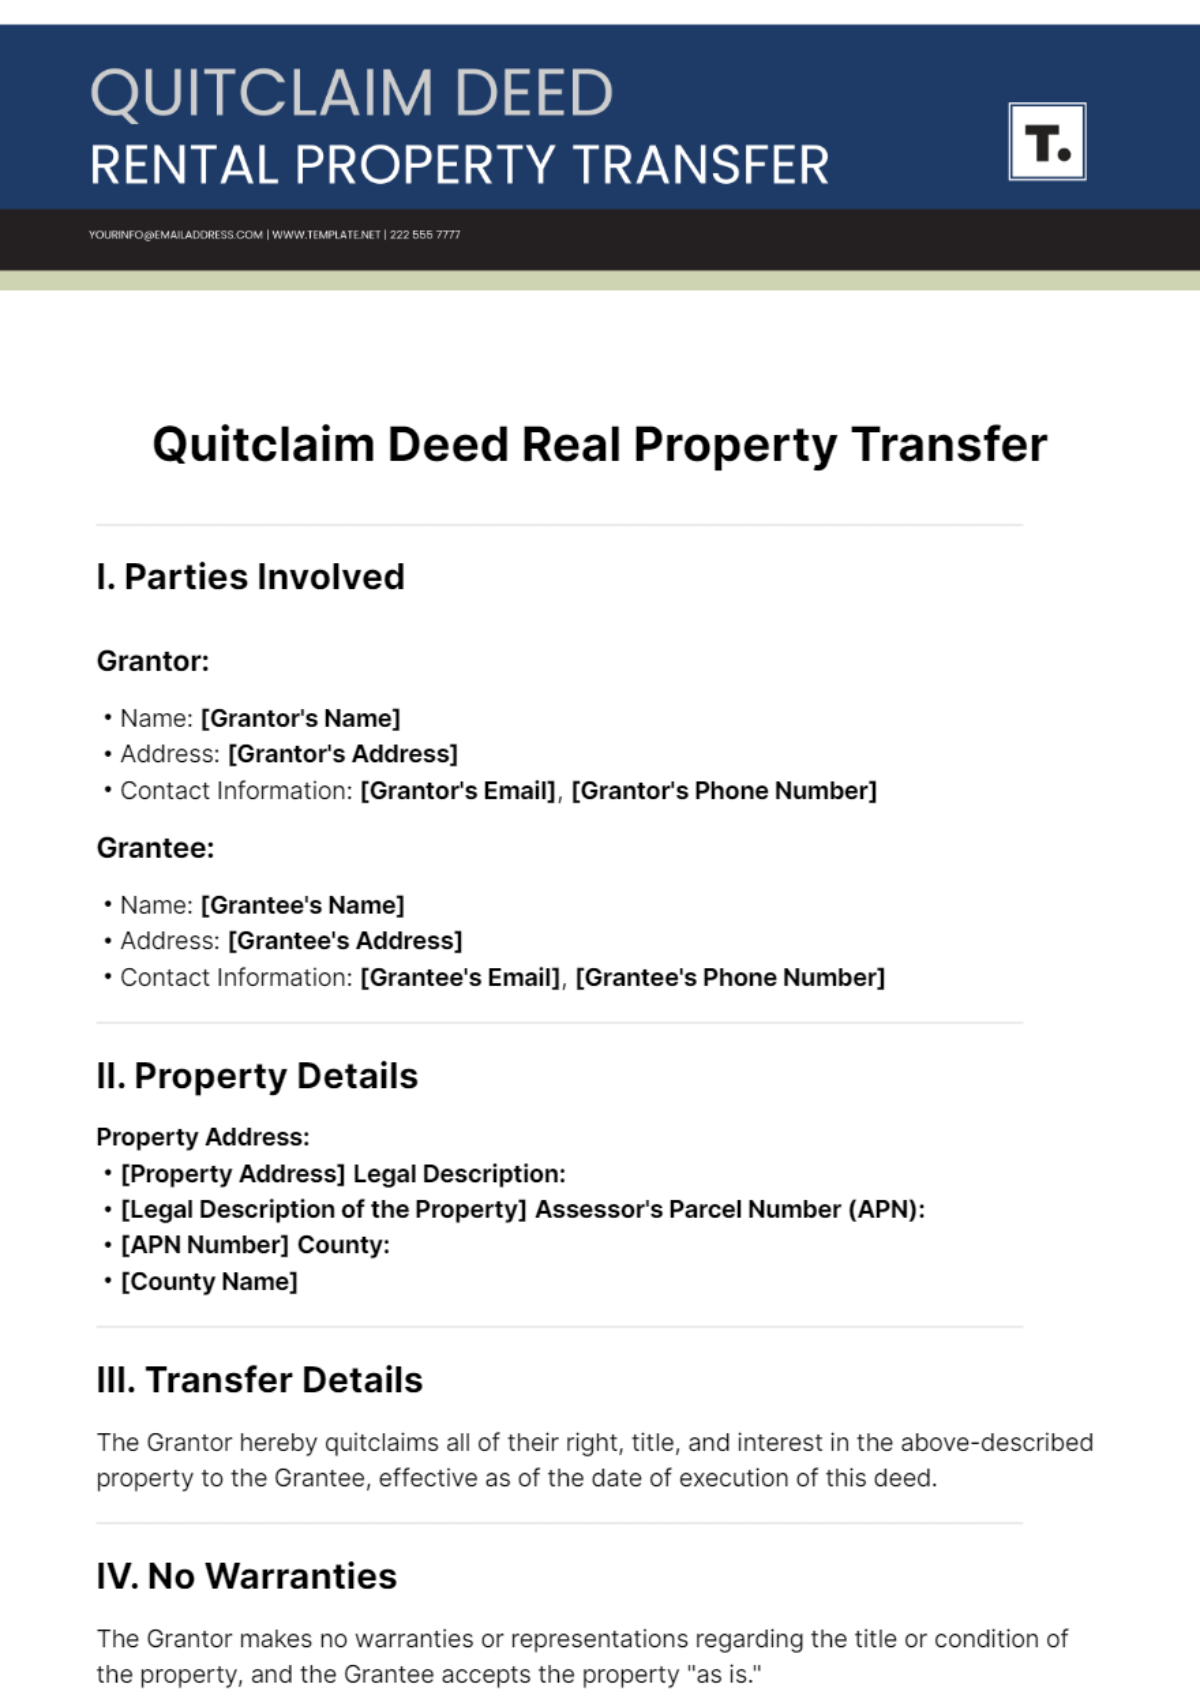 Free Quit Claim Deed Real Property Transfer Template